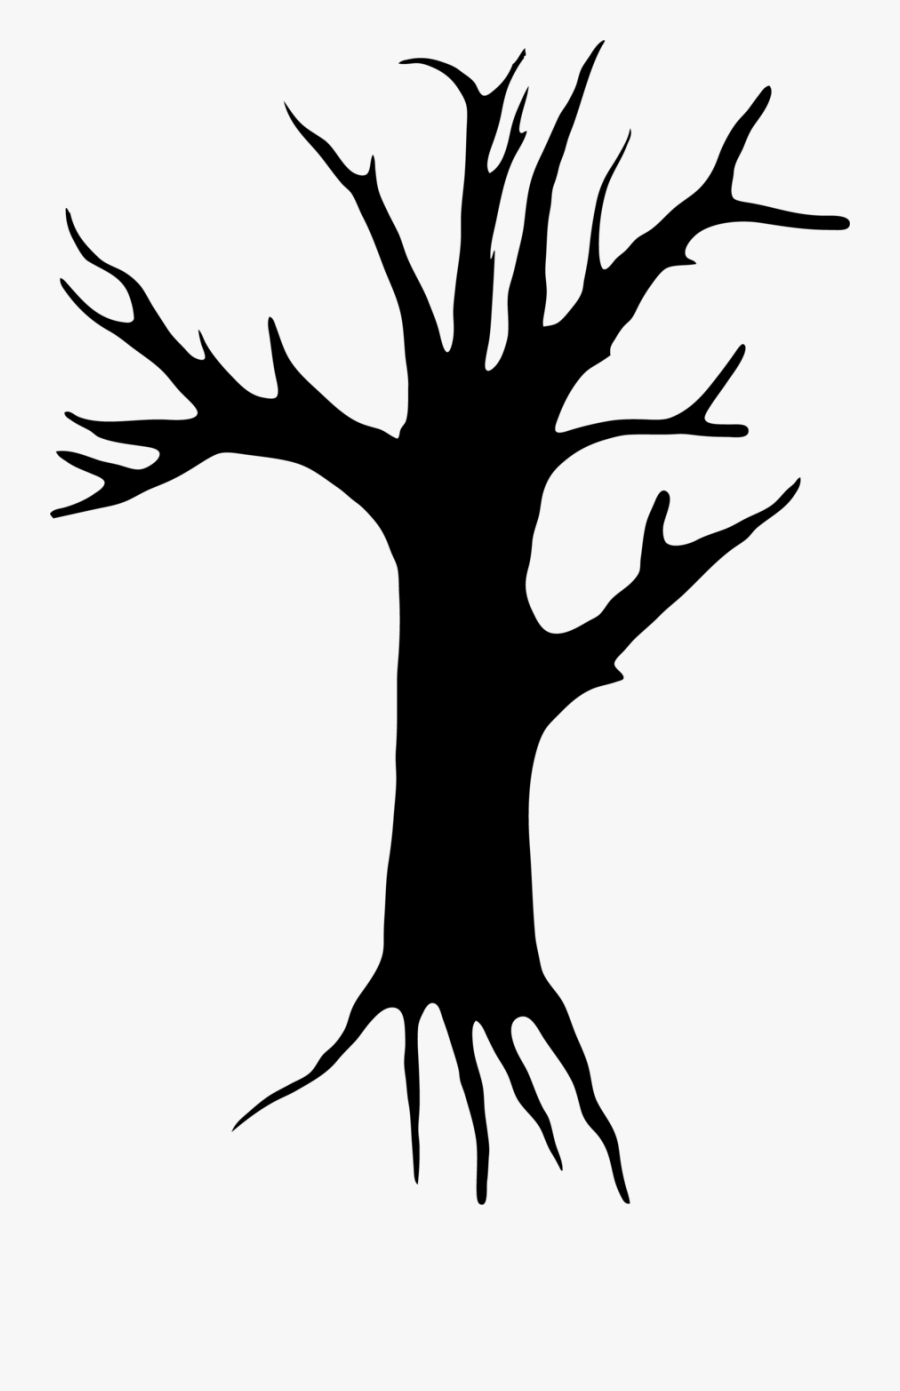 X Clipart - Scary Tree Clip Art, Transparent Clipart